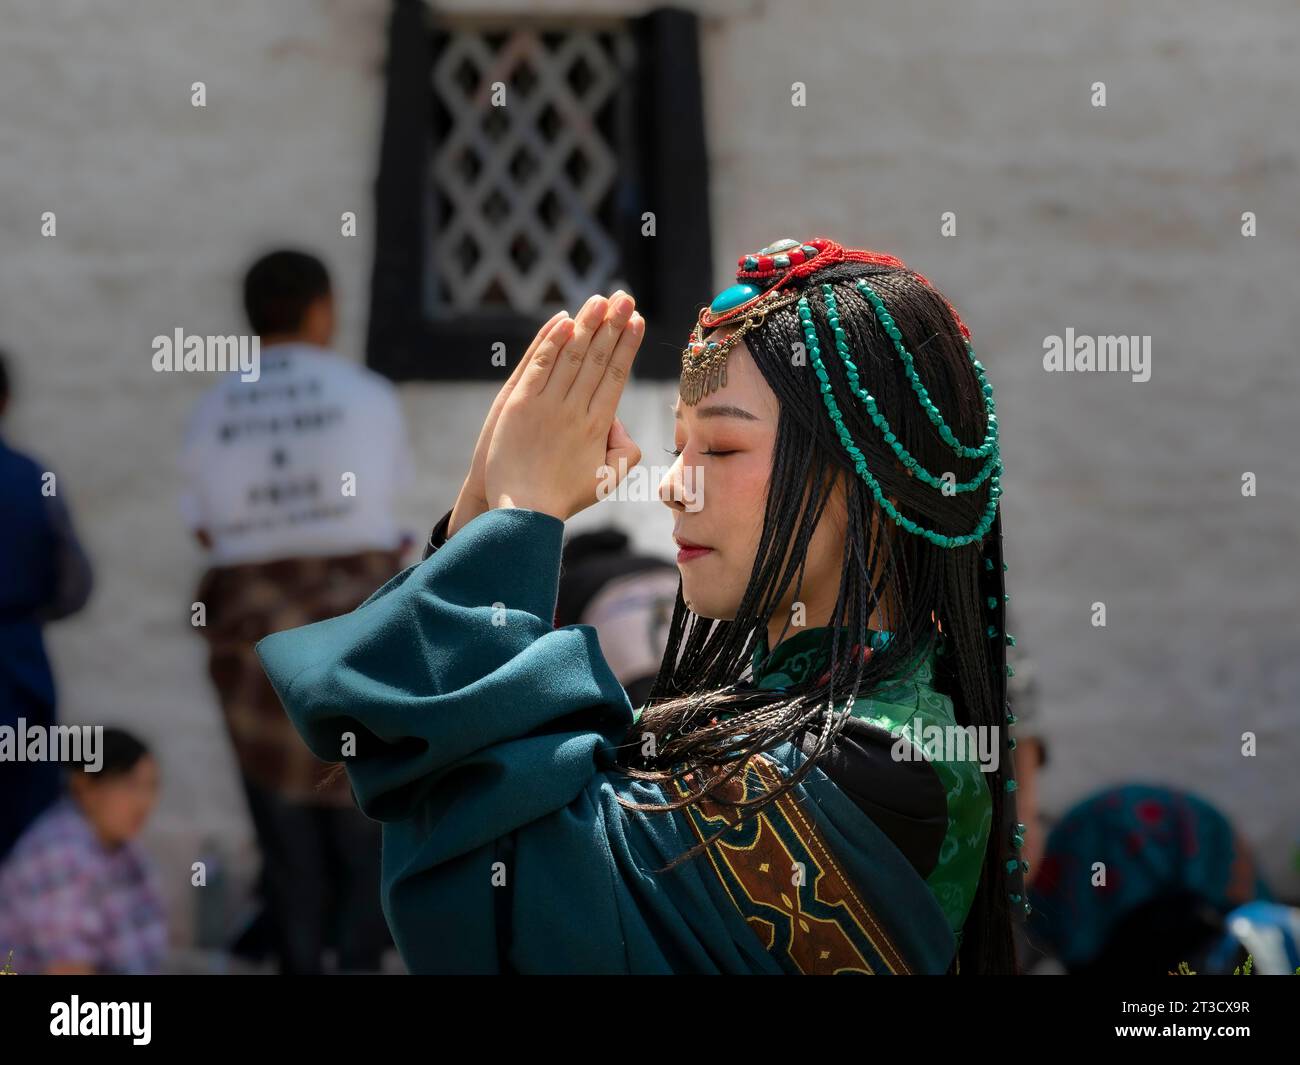 Tibetan young woman with festival clothes, hair ornaments and necklaces, praying hands, Lhasa, Tibet, China Stock Photo